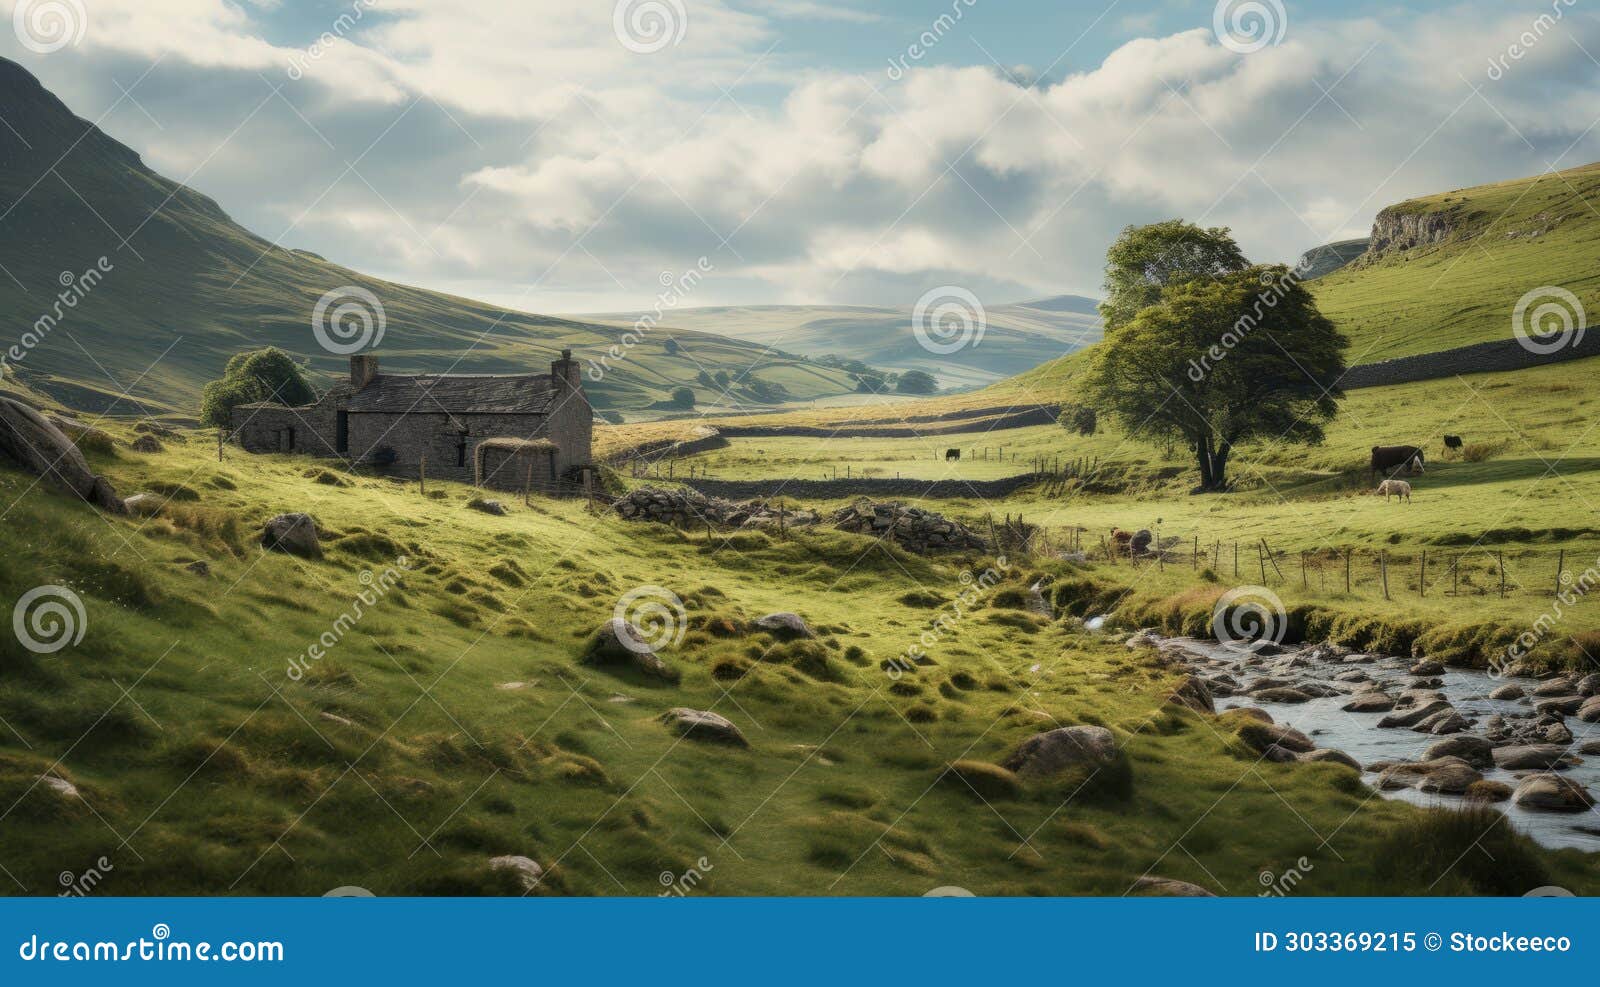 dreamy cottage on stone: serene landscapes in 8k resolution